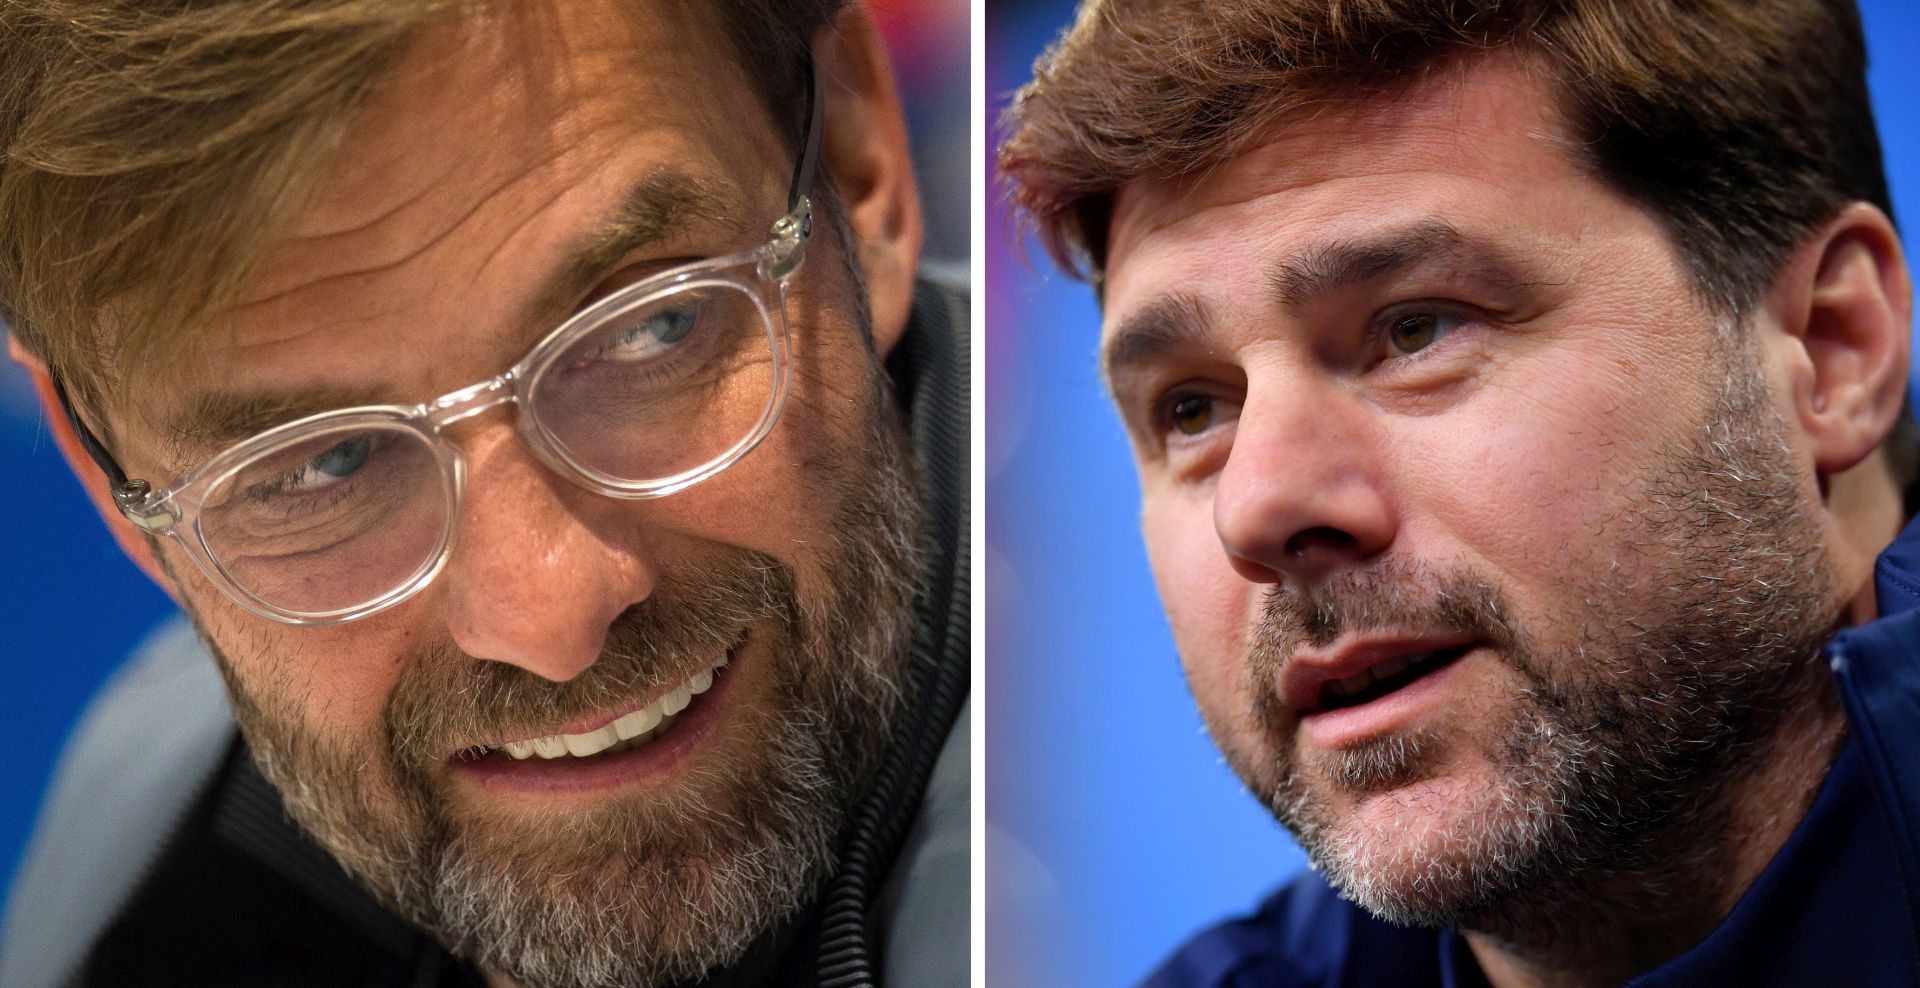 epa07557680 (FILE) - A composite file picture of Liverpool manager Juergen Klopp (L, taken on 05 March 2018 in Liverpool, Britain) and Tottenham's manager Mauricio Pochettino (R, taken on 20 November 2017 in Dortmund, Germany) - (issued 09 May 2019). Liverpool FC will face Tottenham Hotspur in the 2019 UEFA Champions League final at the Wanda Metropolitano stadium in Madrid, Spain, on 01 June 2019.  EPA/PETER POWELL - SASCHA STEINBACH